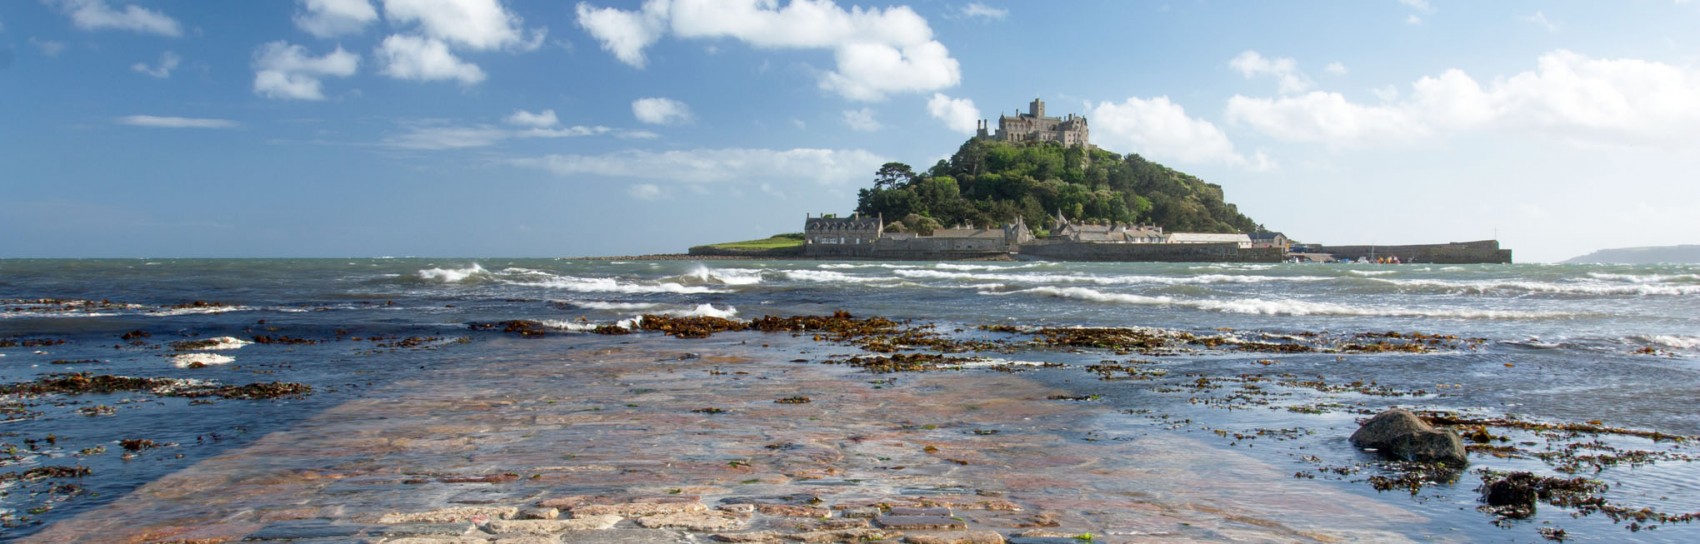 St. Michael's Mount near Penzance in Cornwall. Photograph by GRAHAM CUSTANCE